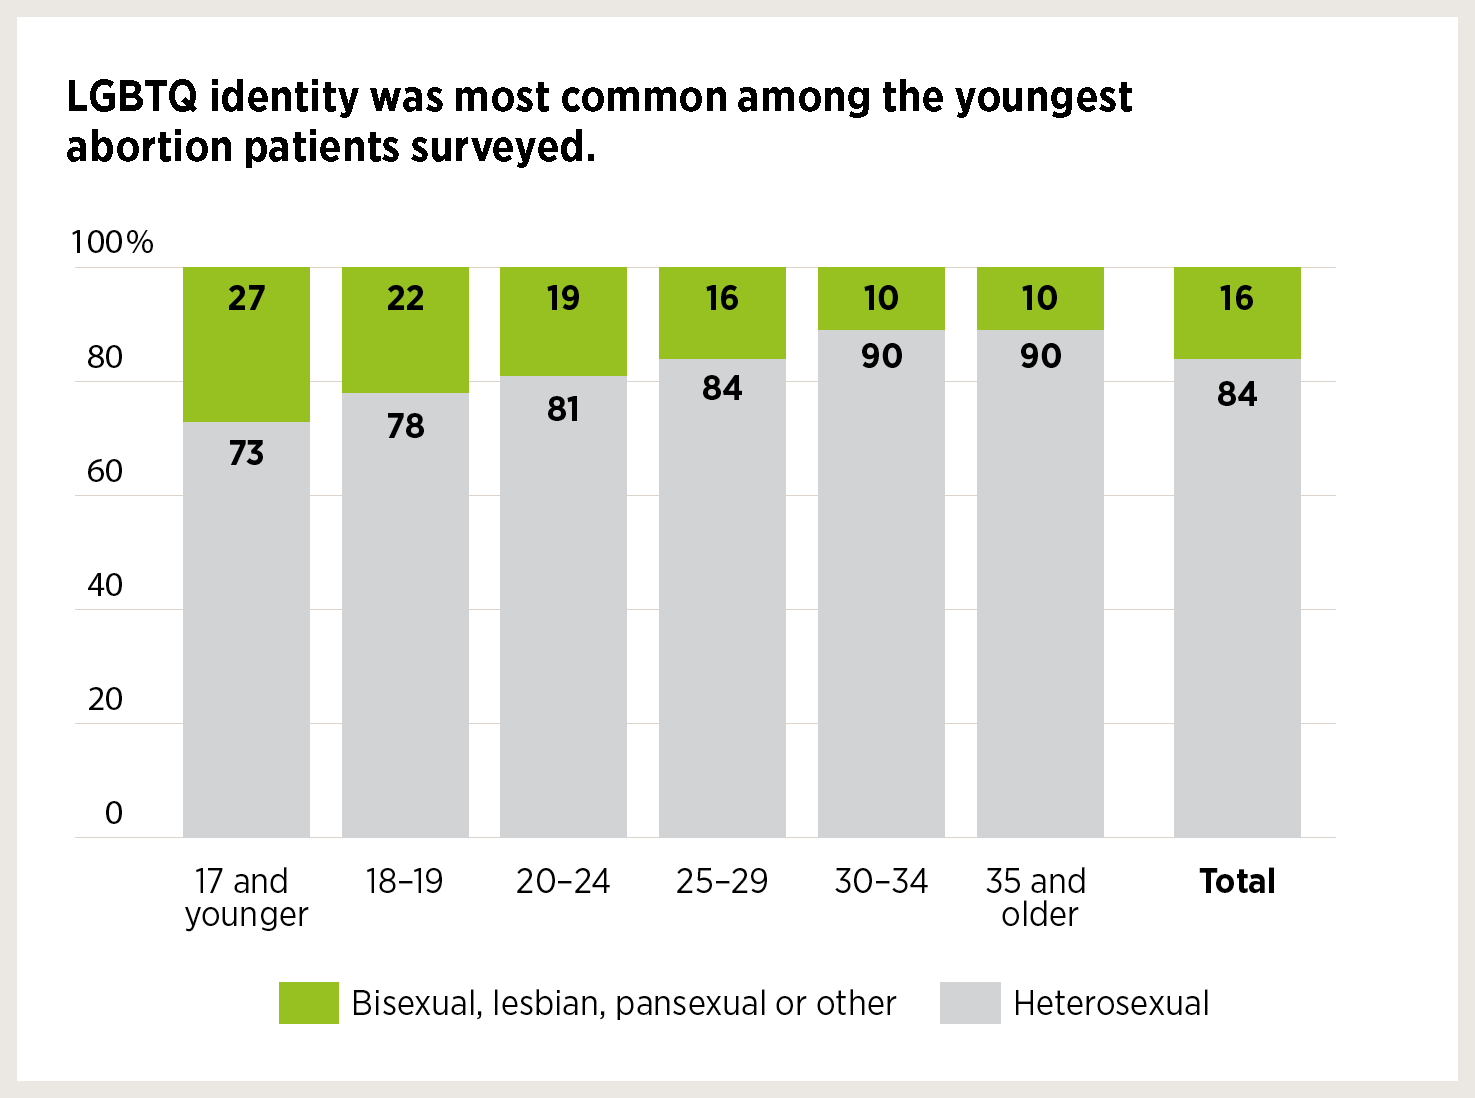 Chart labeled "LGBTQ identity was most common among the youngest abortion patients surveyed"